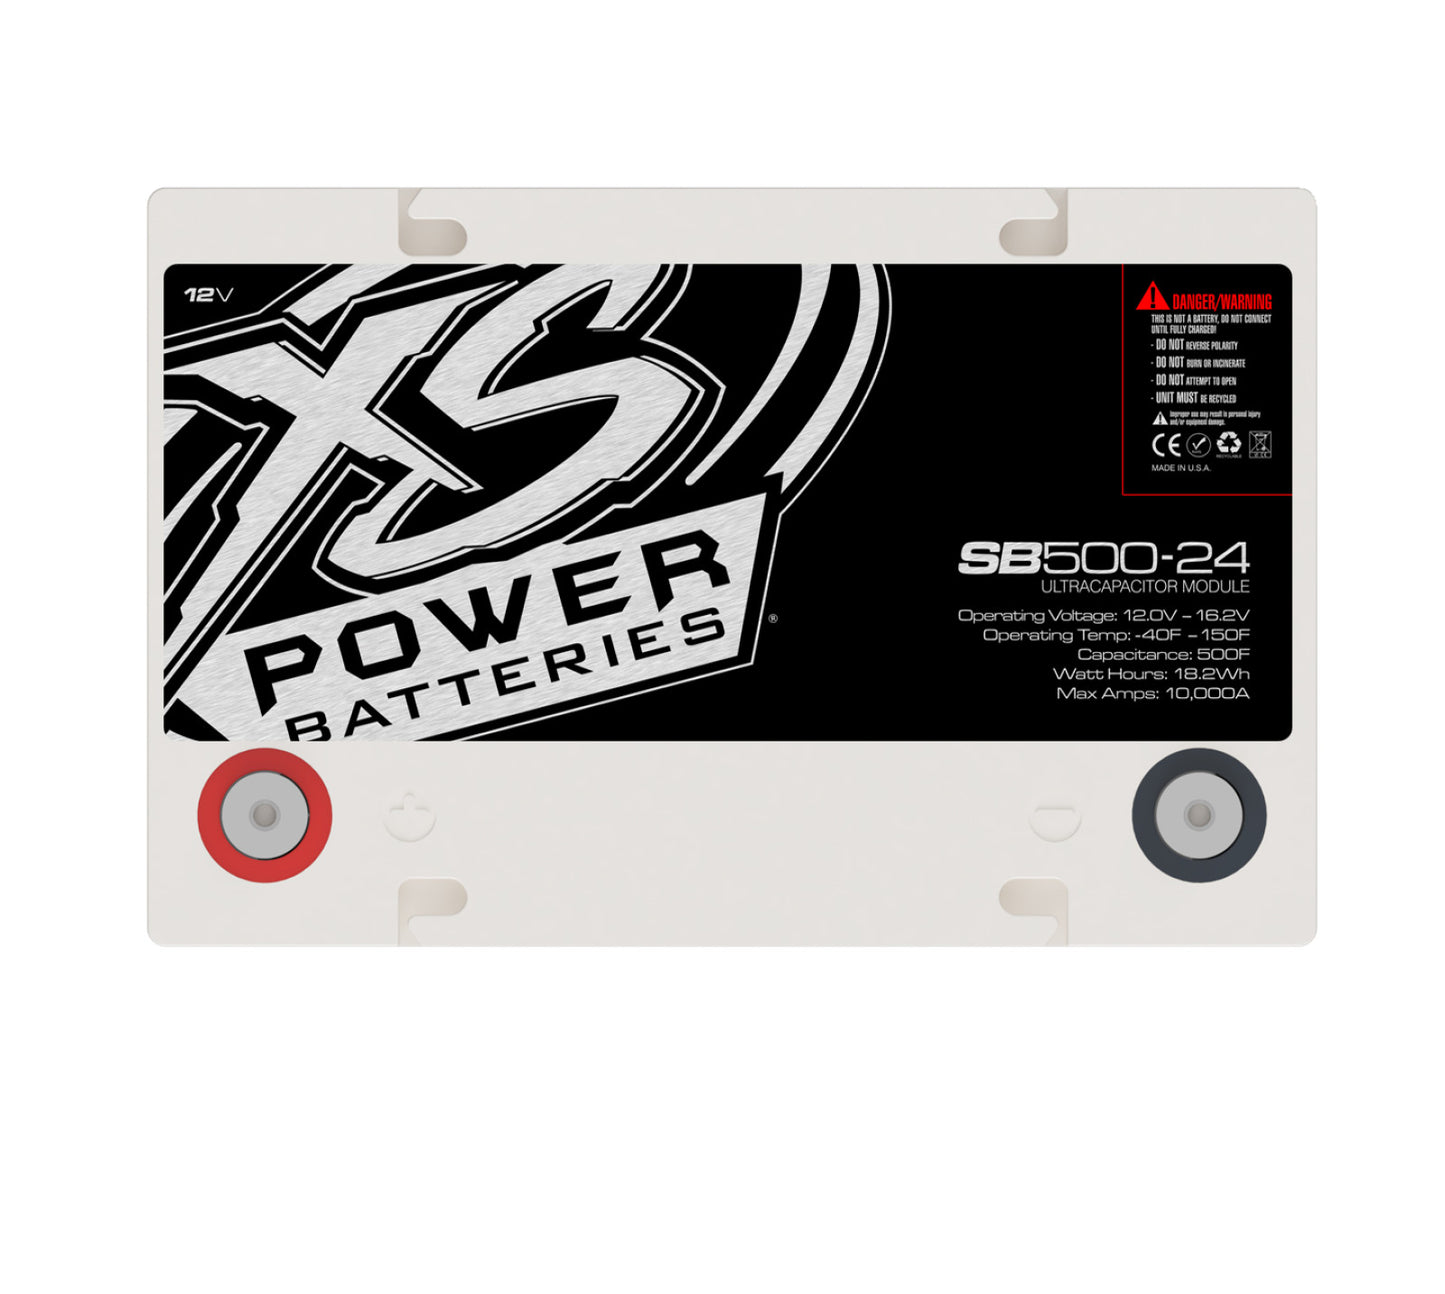 XS Power Batteries 12V Super Bank Capacitor Modules - M6 Terminal Bolts Included 10000 Max Amps SB500-24